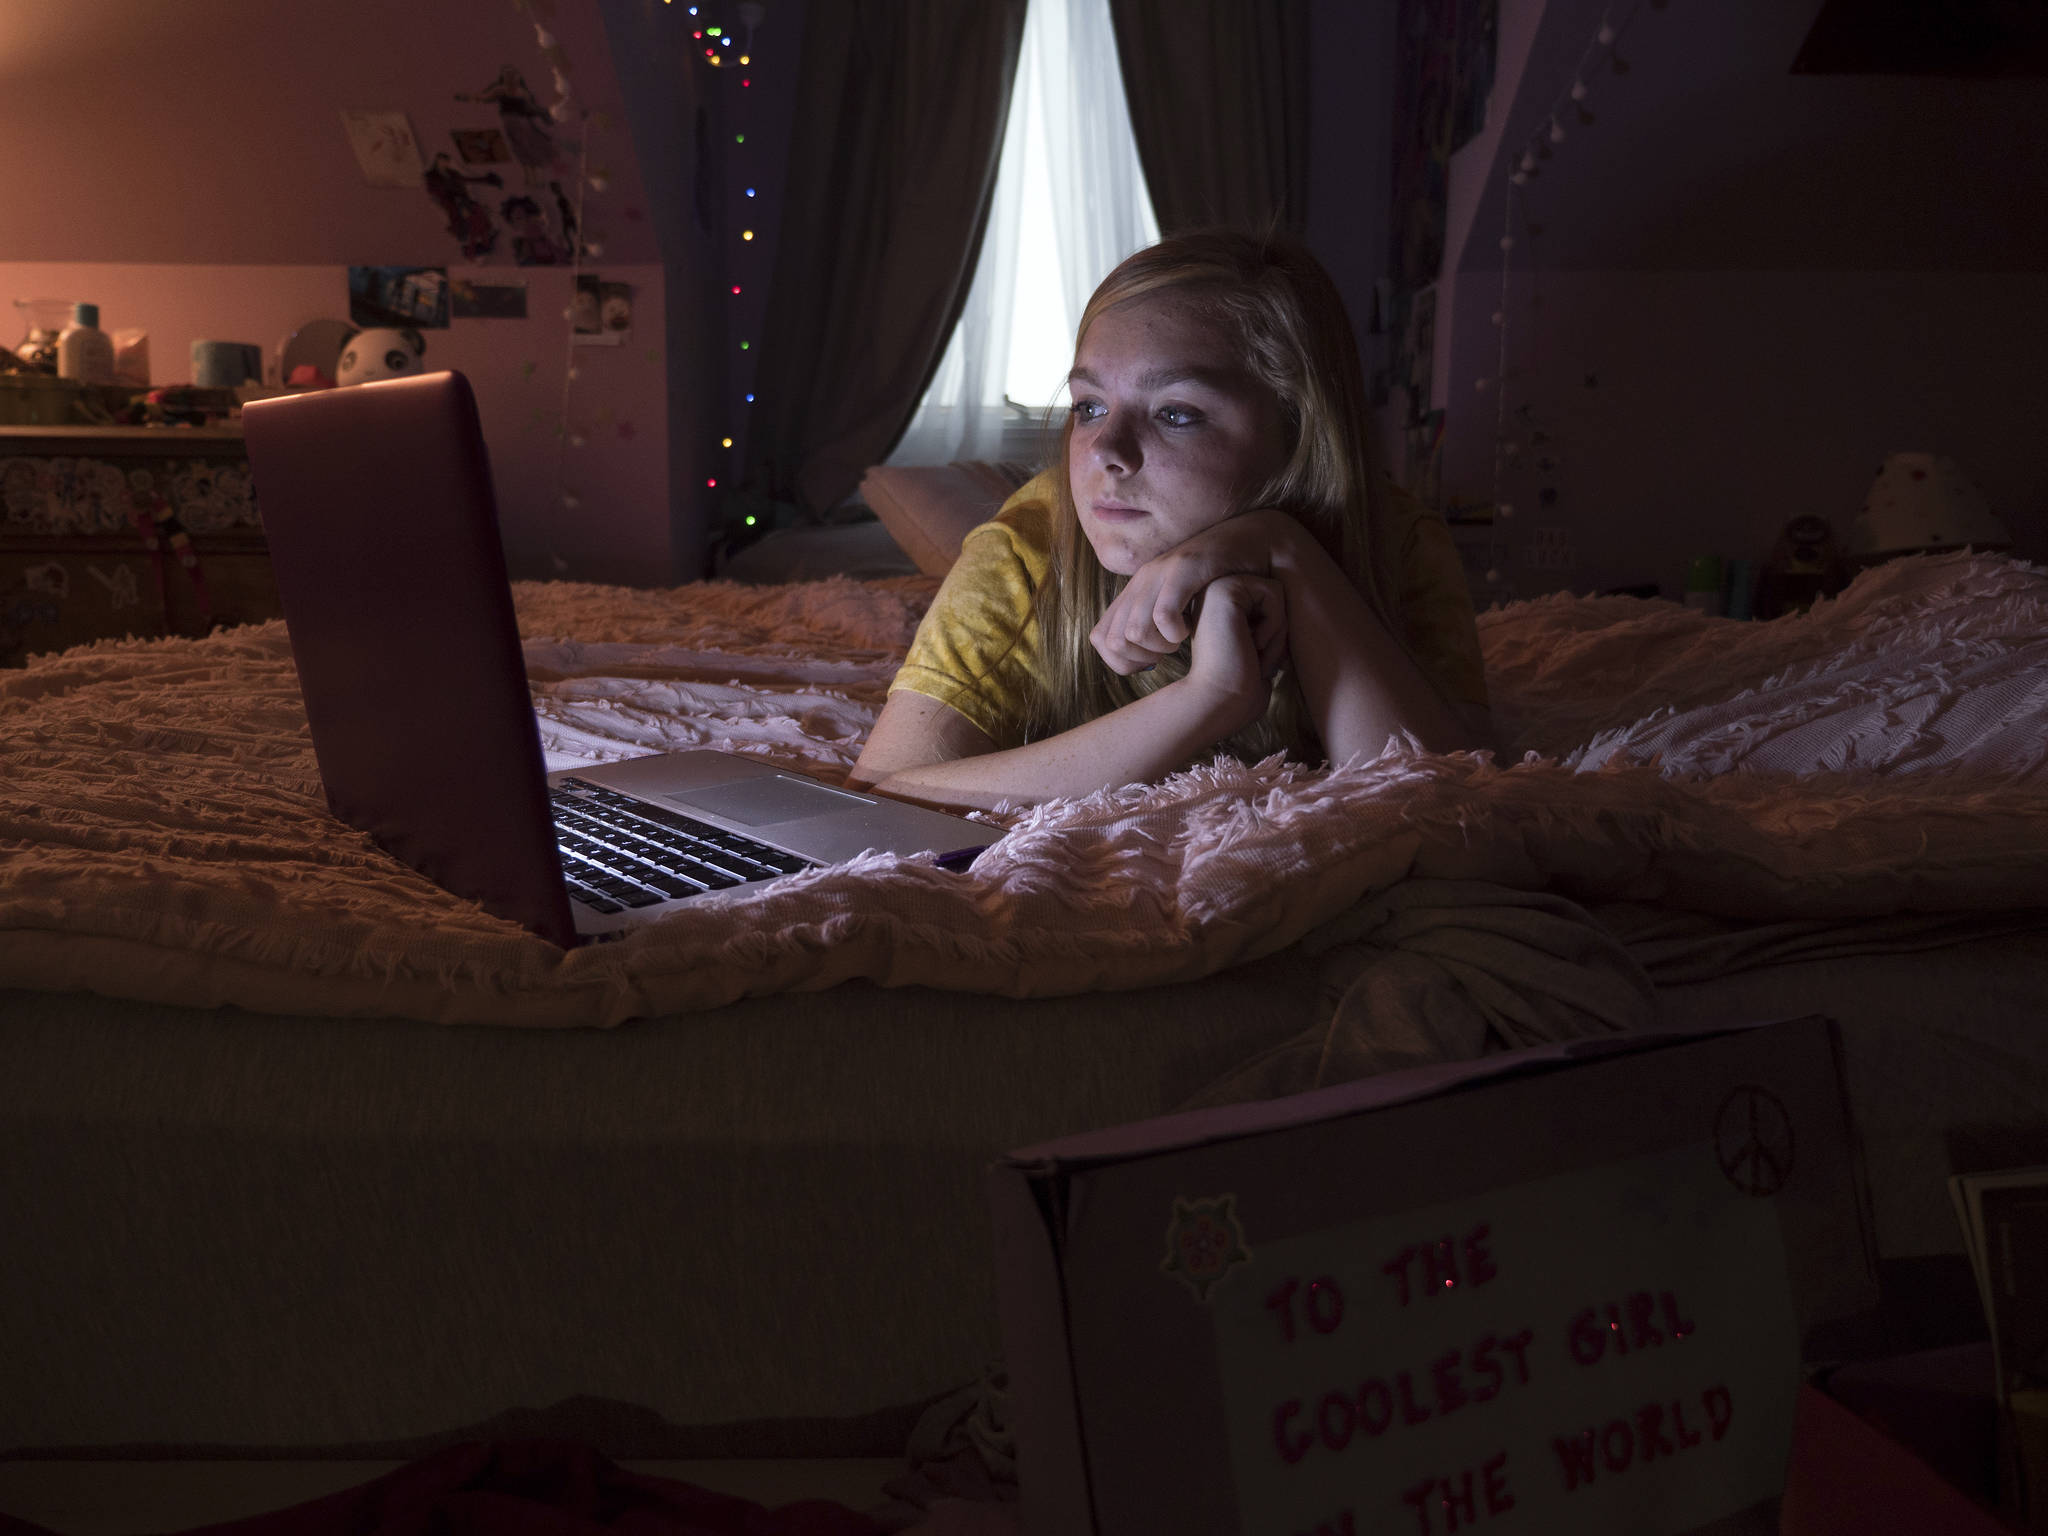 Kayla (Elsie Fisher) stays glued to her screens in ‘Eighth Grade.’ Photo by Linda Kallerus/A24